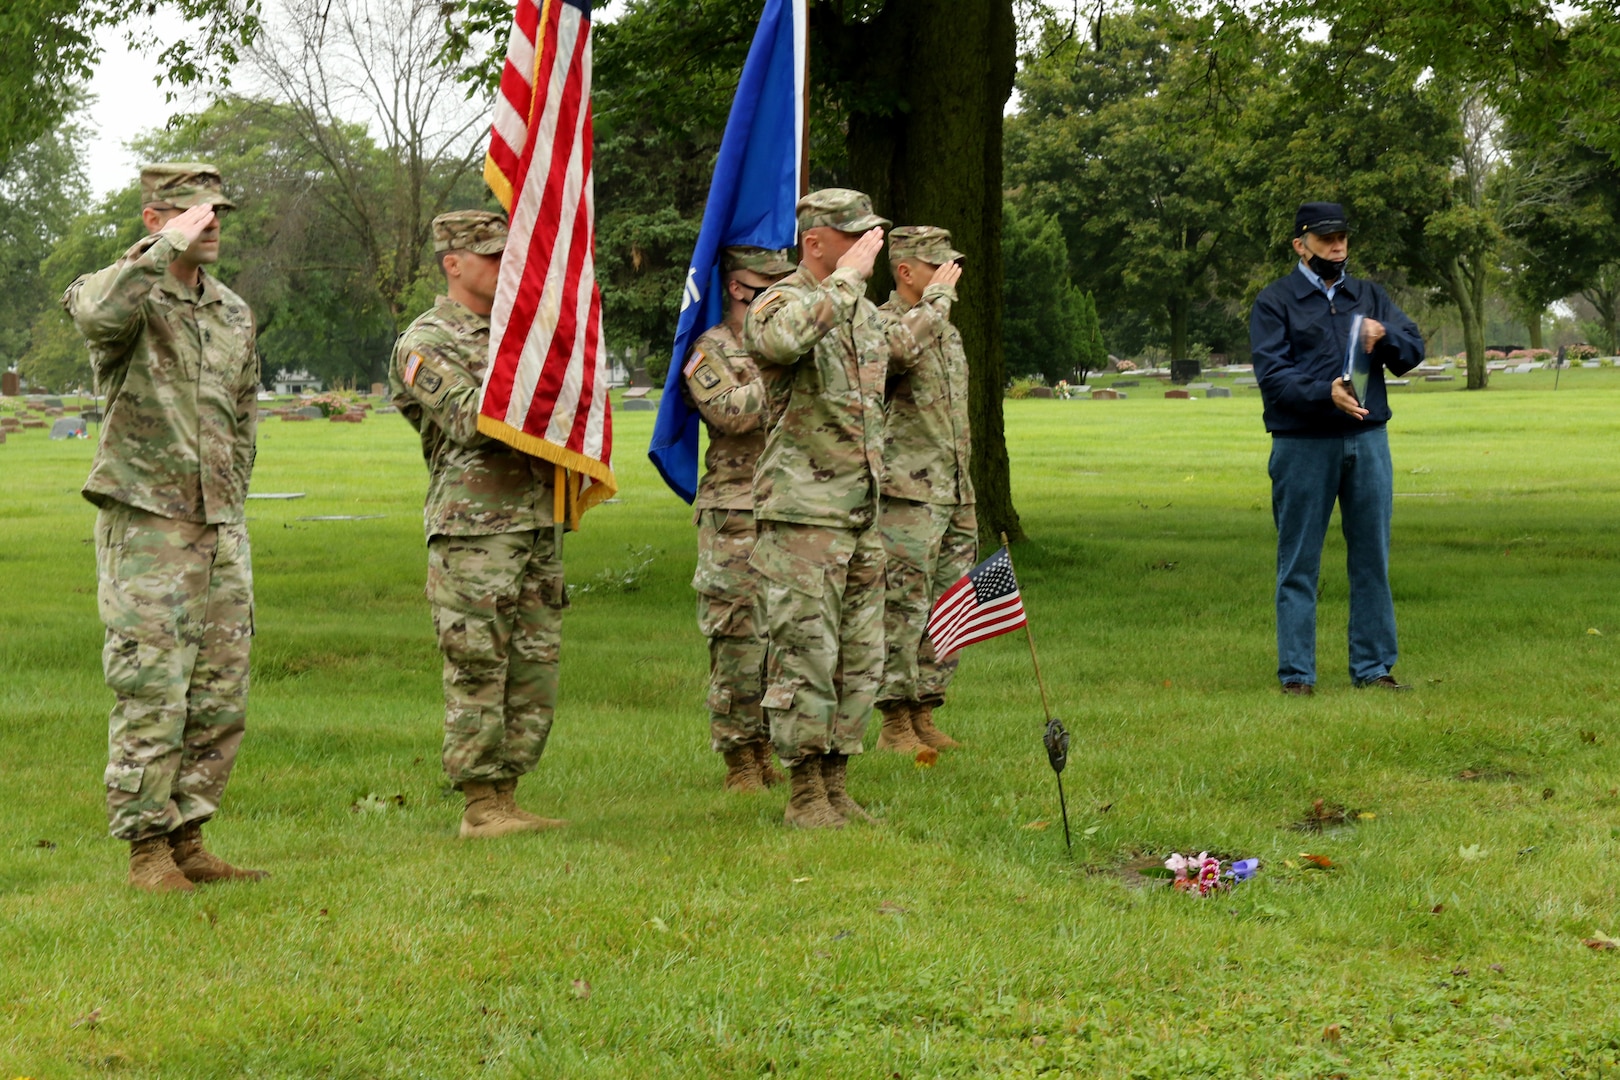 Members of a Wisconsin National Guard color guard with Battery C, 1st Battalion, 120th Field Artillery, salute during a headstone dedication ceremony for Staff Sgt. Walter A. Schaller Sept. 10, 2020, at Holy Cross Cemetery in Milwaukee. Schaller joined the Wisconsin Army National Guard's 32nd Division on April 29, 1941, and was killed in New Guinea on Feb. 20, 1944. He was buried in an unmarked grave at the cemetery in 1949 until a local historian discovered it through research.